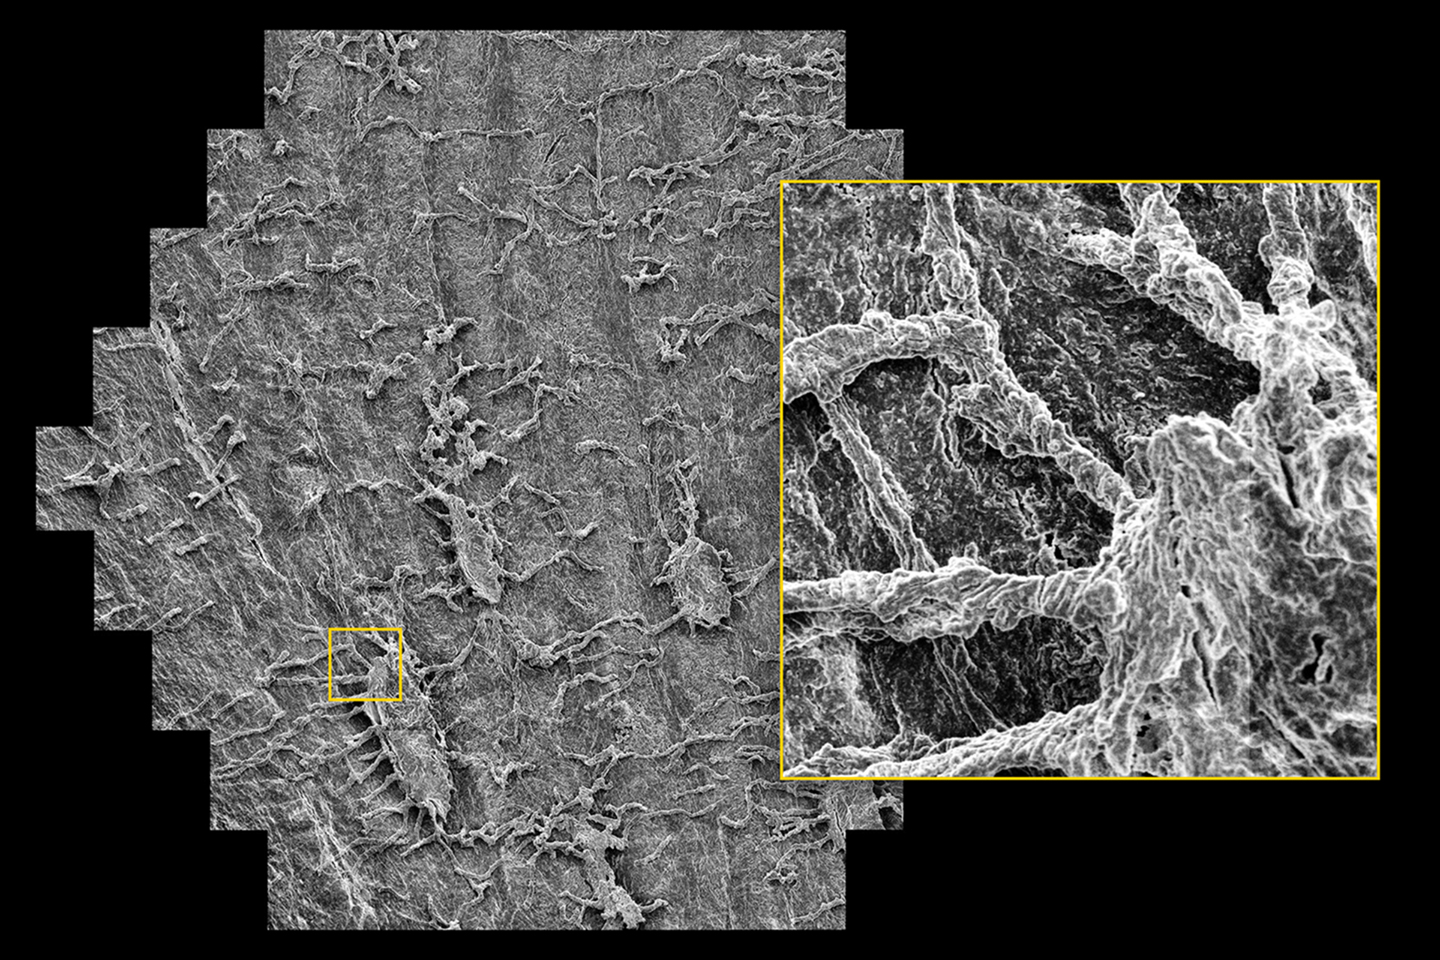 Femoral neck sample, selectively etched to carve out osteocytes, hidden within the bone matrix before. Sample courtesy of M. Knothe Tate, University of New South Wales, Australia, and U. Knothe, Cleveland, OH, USA.